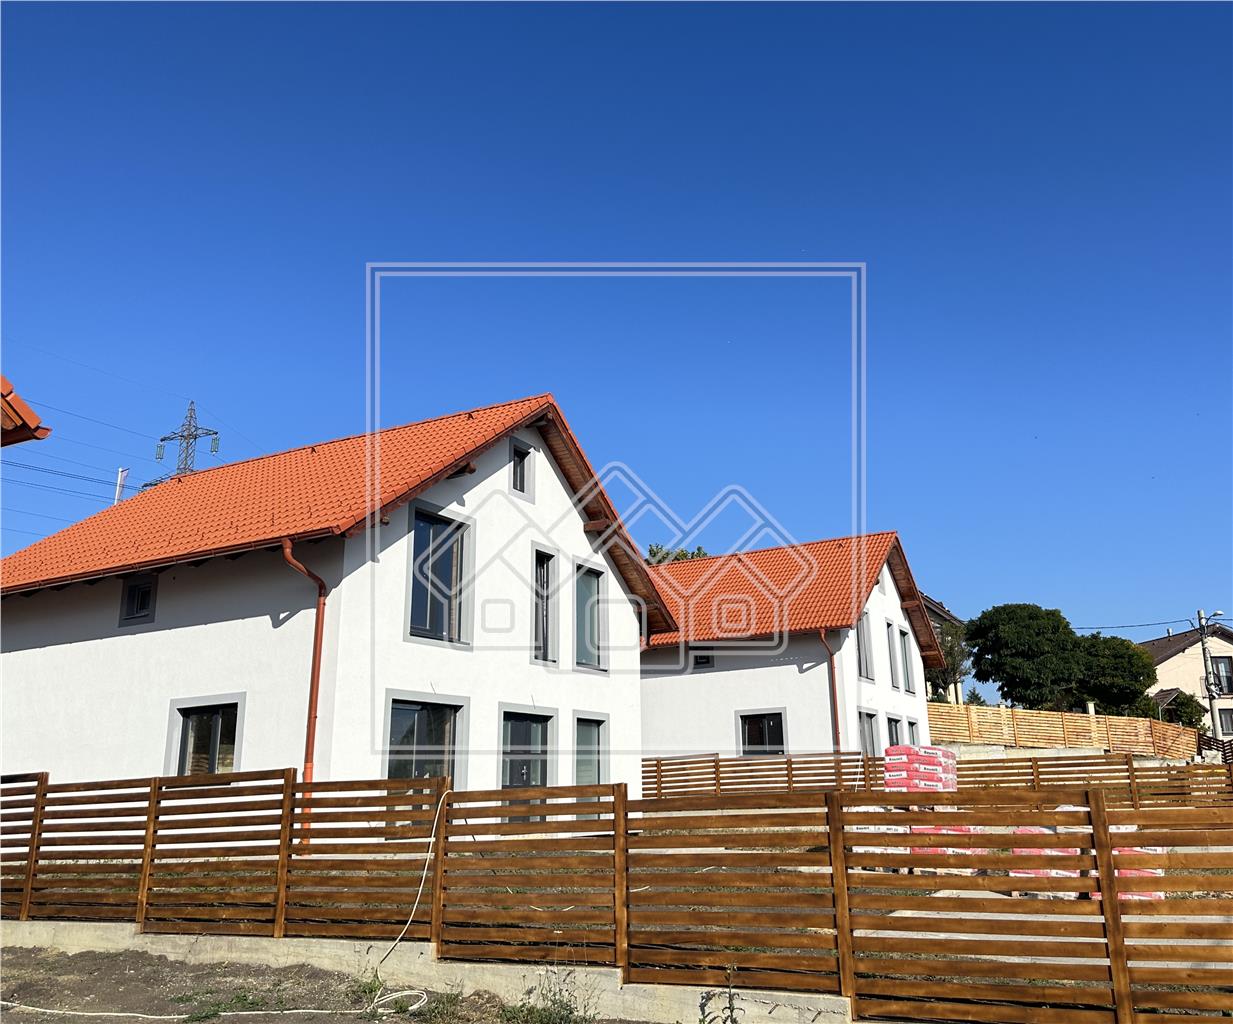 House for sale in Sibiu - individual - land of 778 sqm